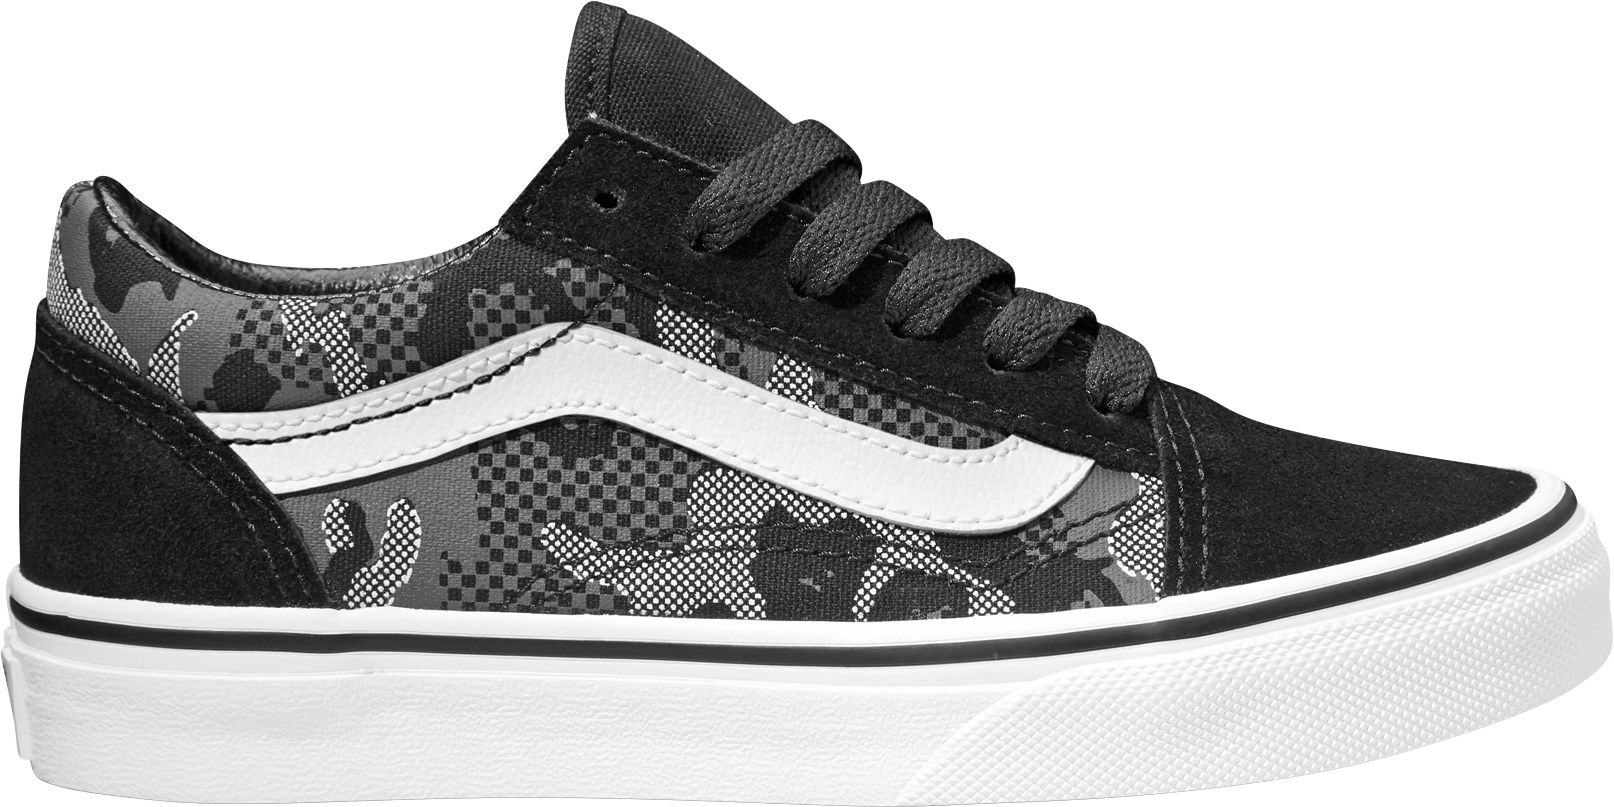 how much do vans cost on black friday